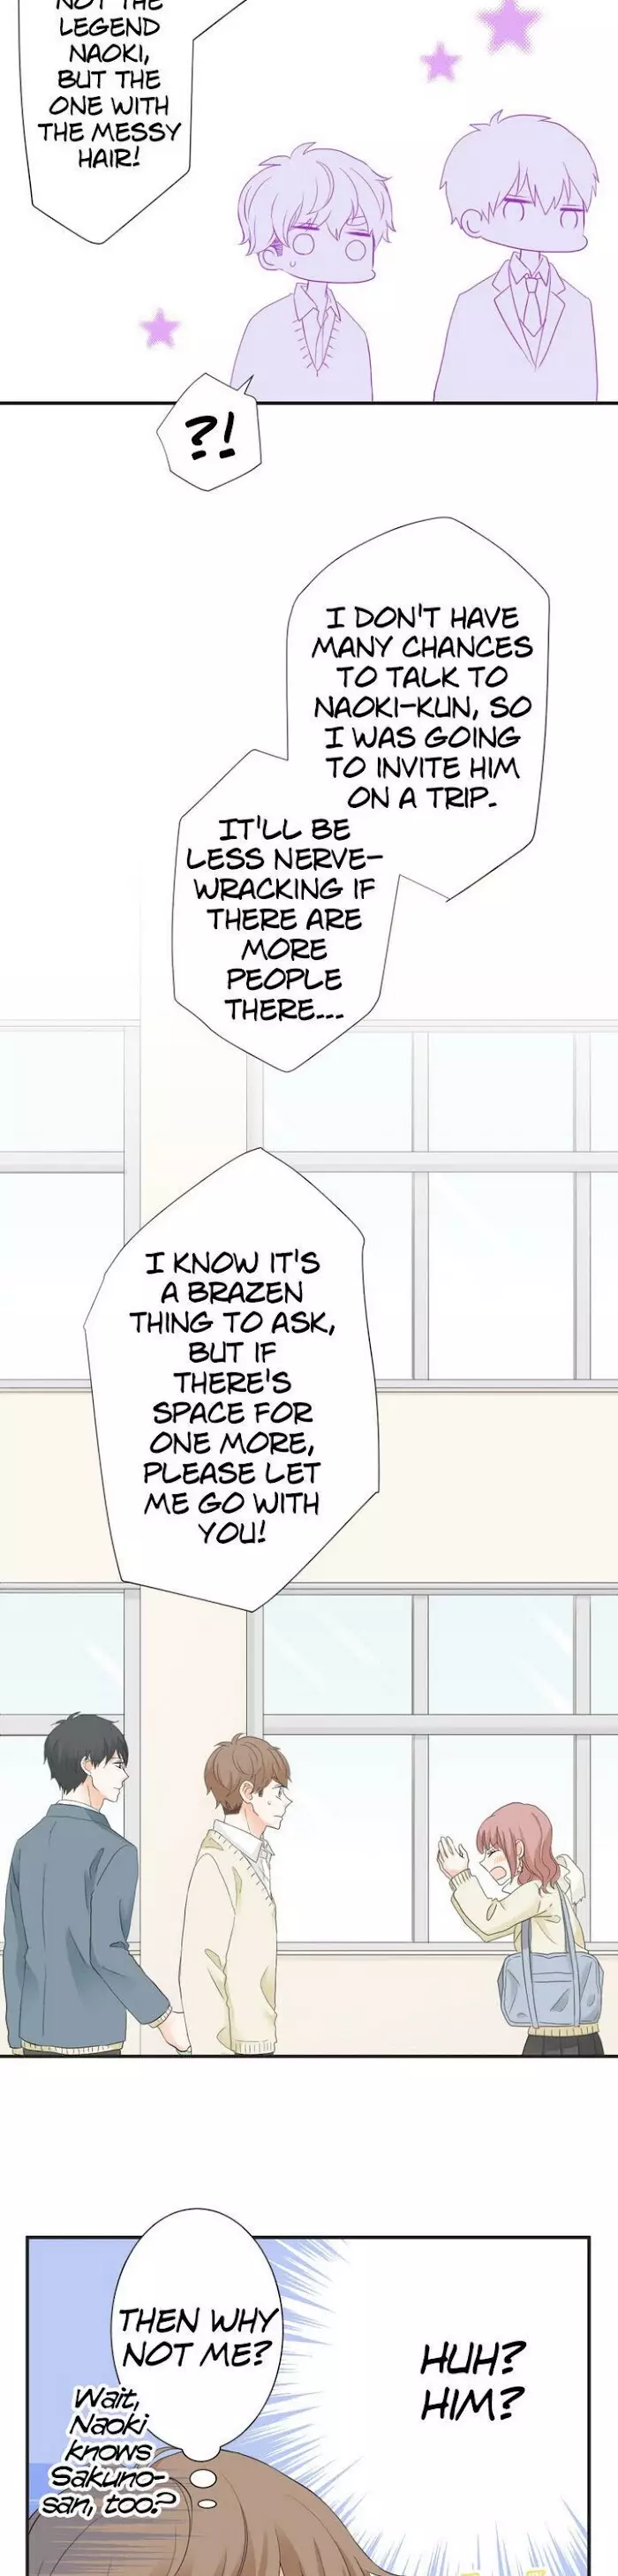 Mismatched Love - 65 page 13-1e019ae0